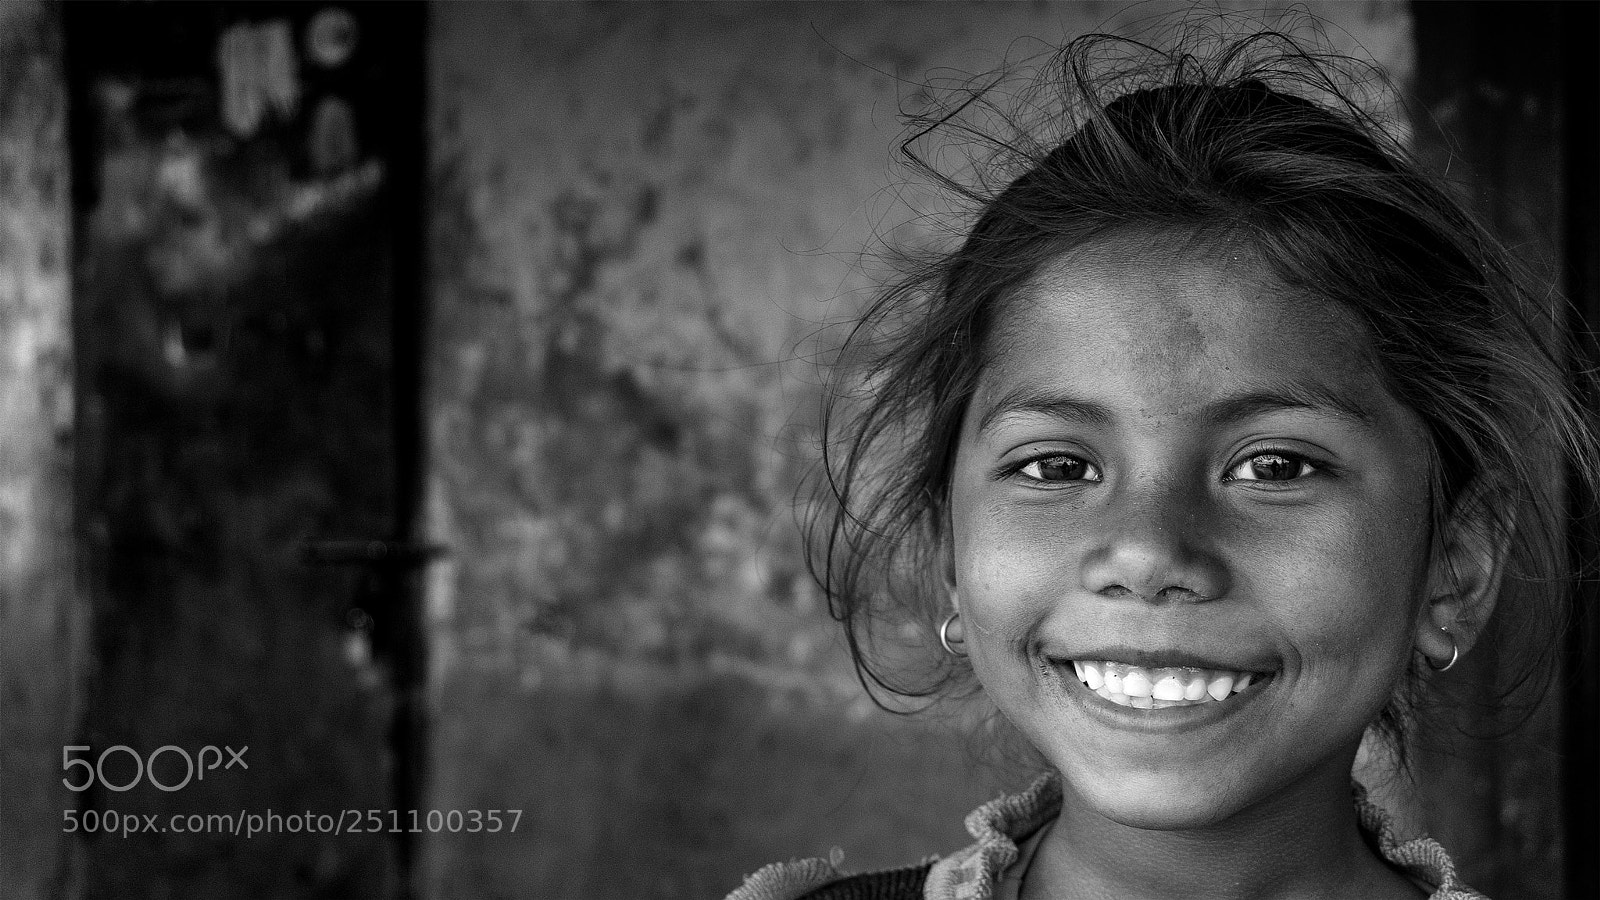 Sony a6000 sample photo. A rural girl photography